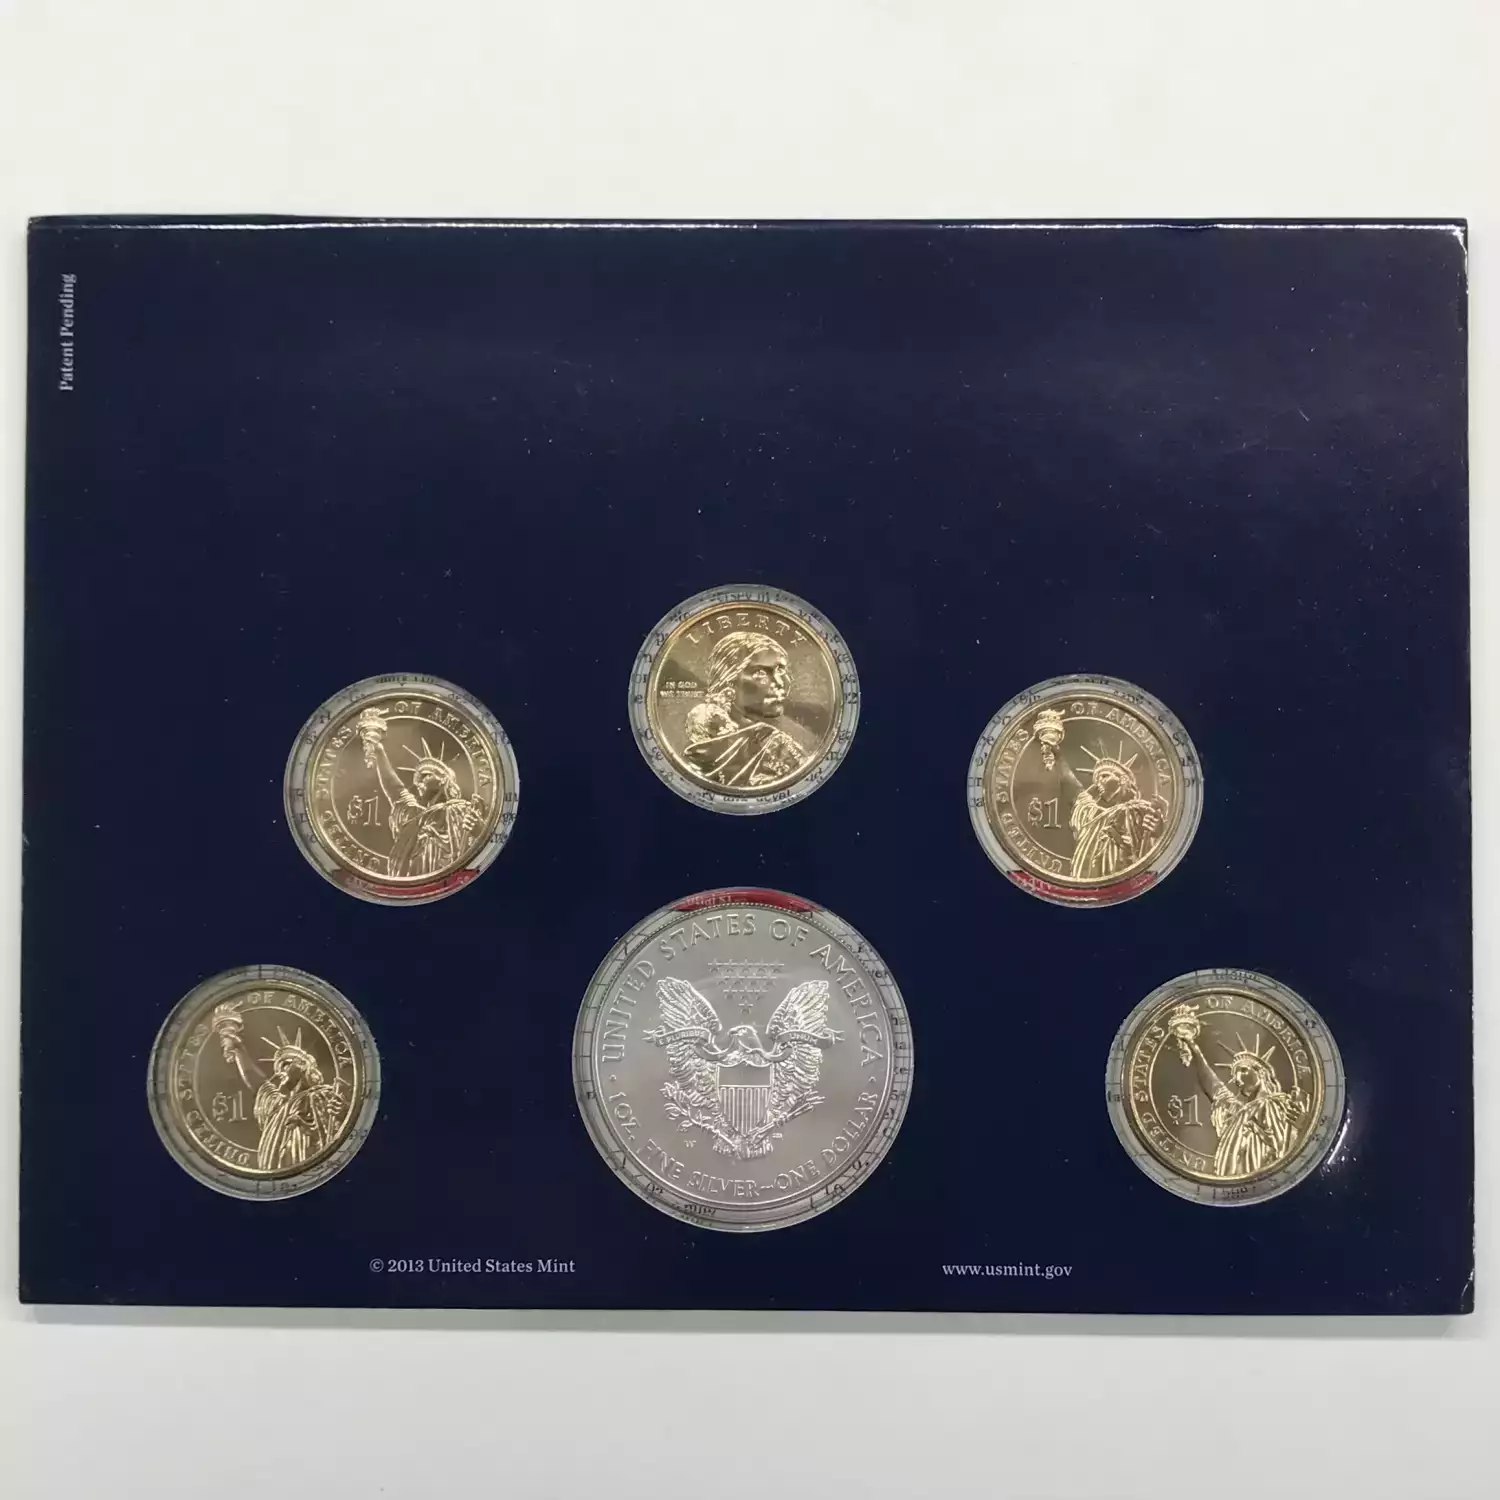 2013 Annual Uncirculated Dollar Coin Set incl W Burnished Silver Eagle - US Mint (2)